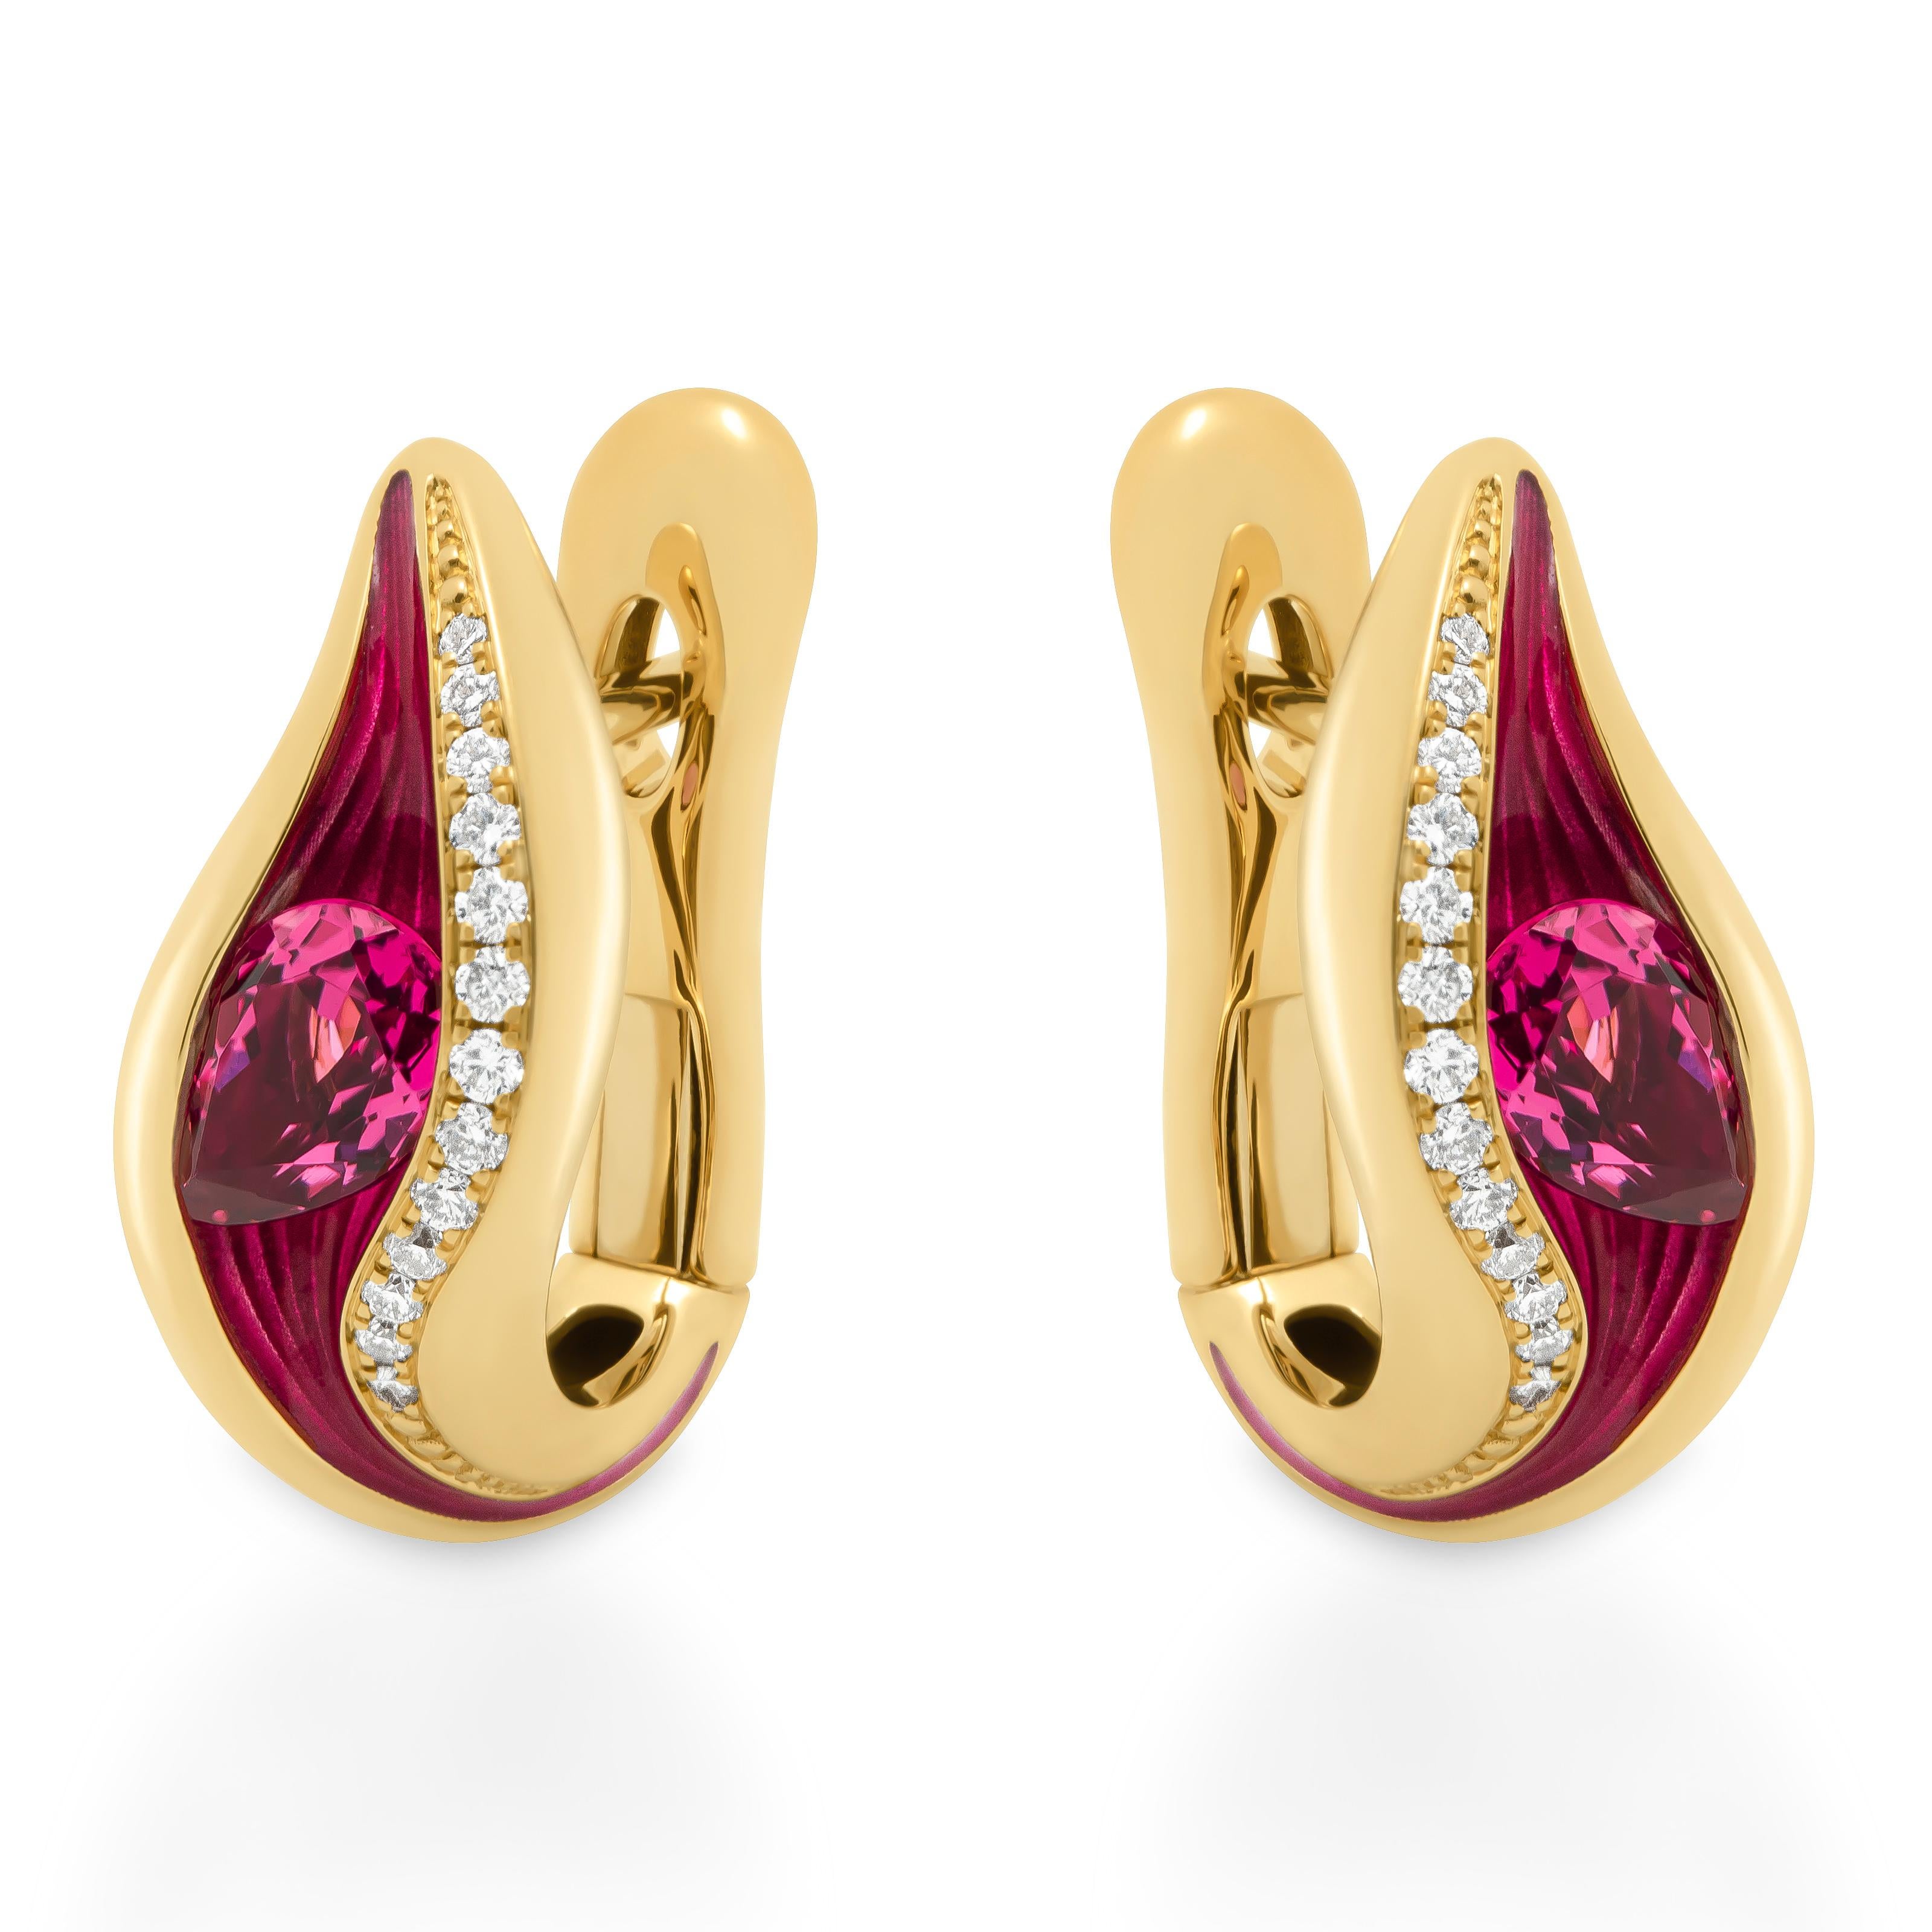 Pink Tourmaline Diamonds Enamel 18 Karat Yellow Gold Melted Colors Earrings
Our new collection 